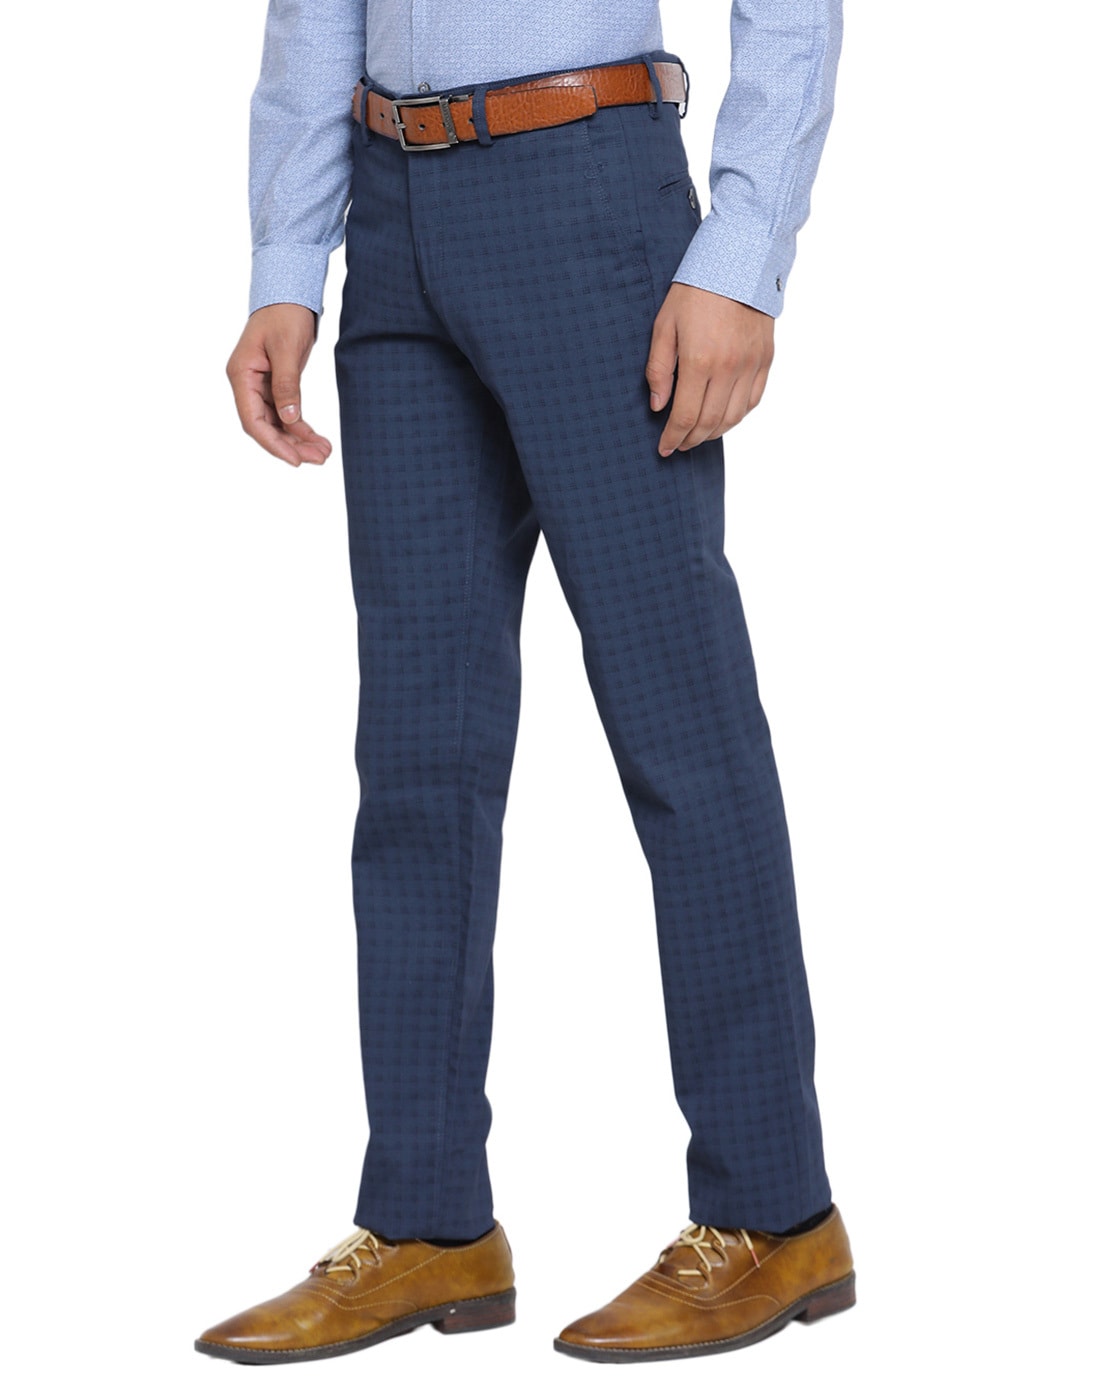 Turtle Formal Trousers  Buy Turtle Formal Trousers online in India